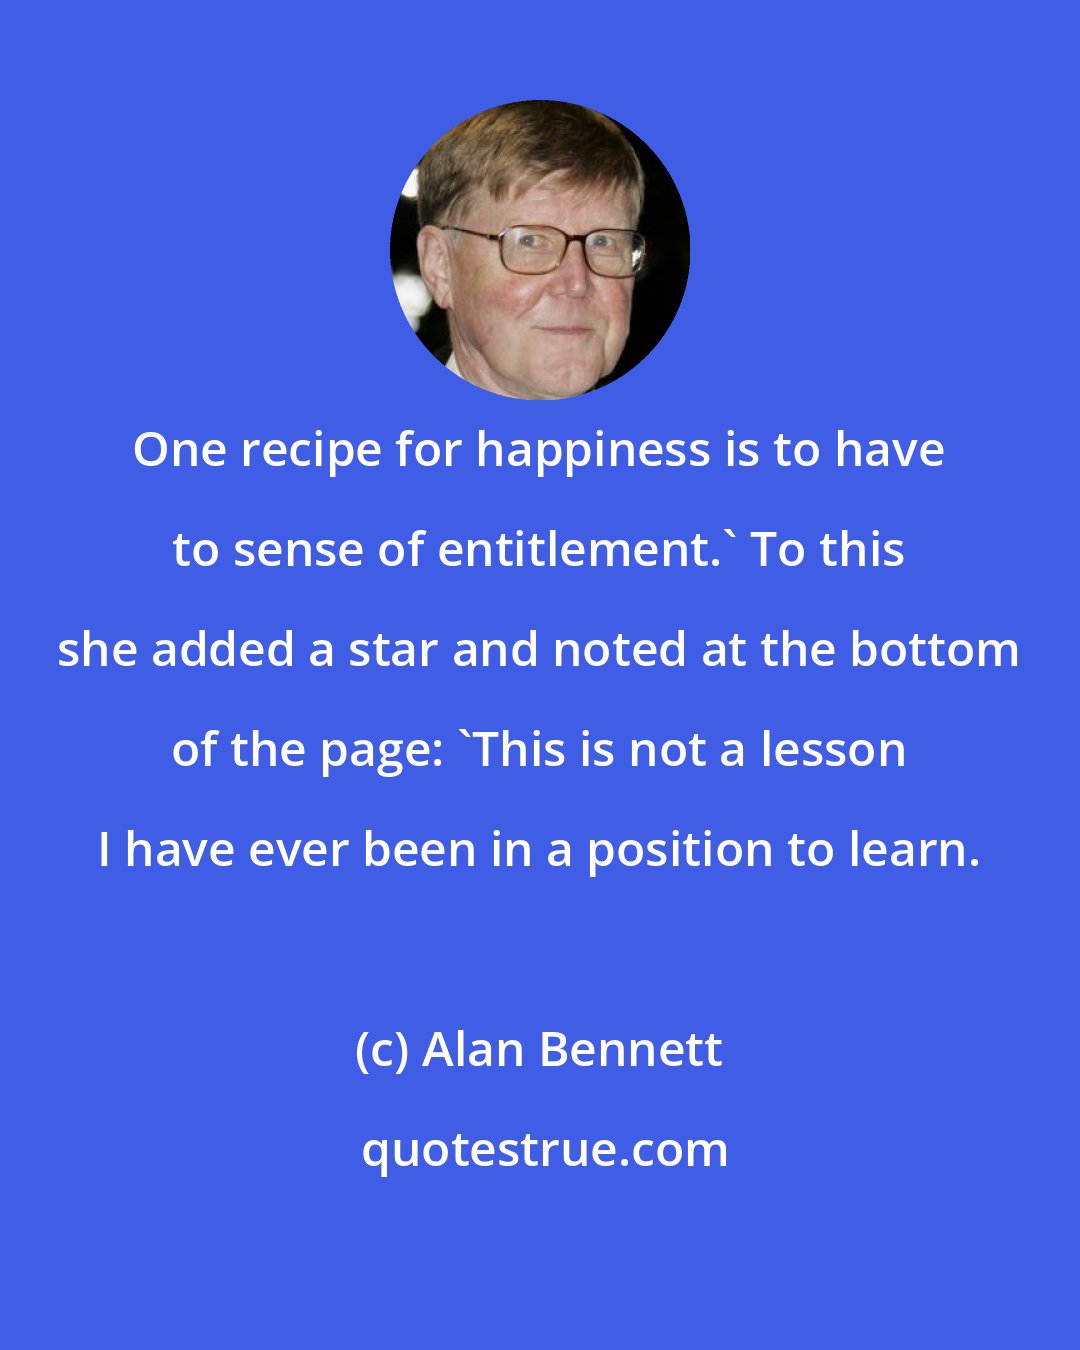 Alan Bennett: One recipe for happiness is to have to sense of entitlement.' To this she added a star and noted at the bottom of the page: 'This is not a lesson I have ever been in a position to learn.